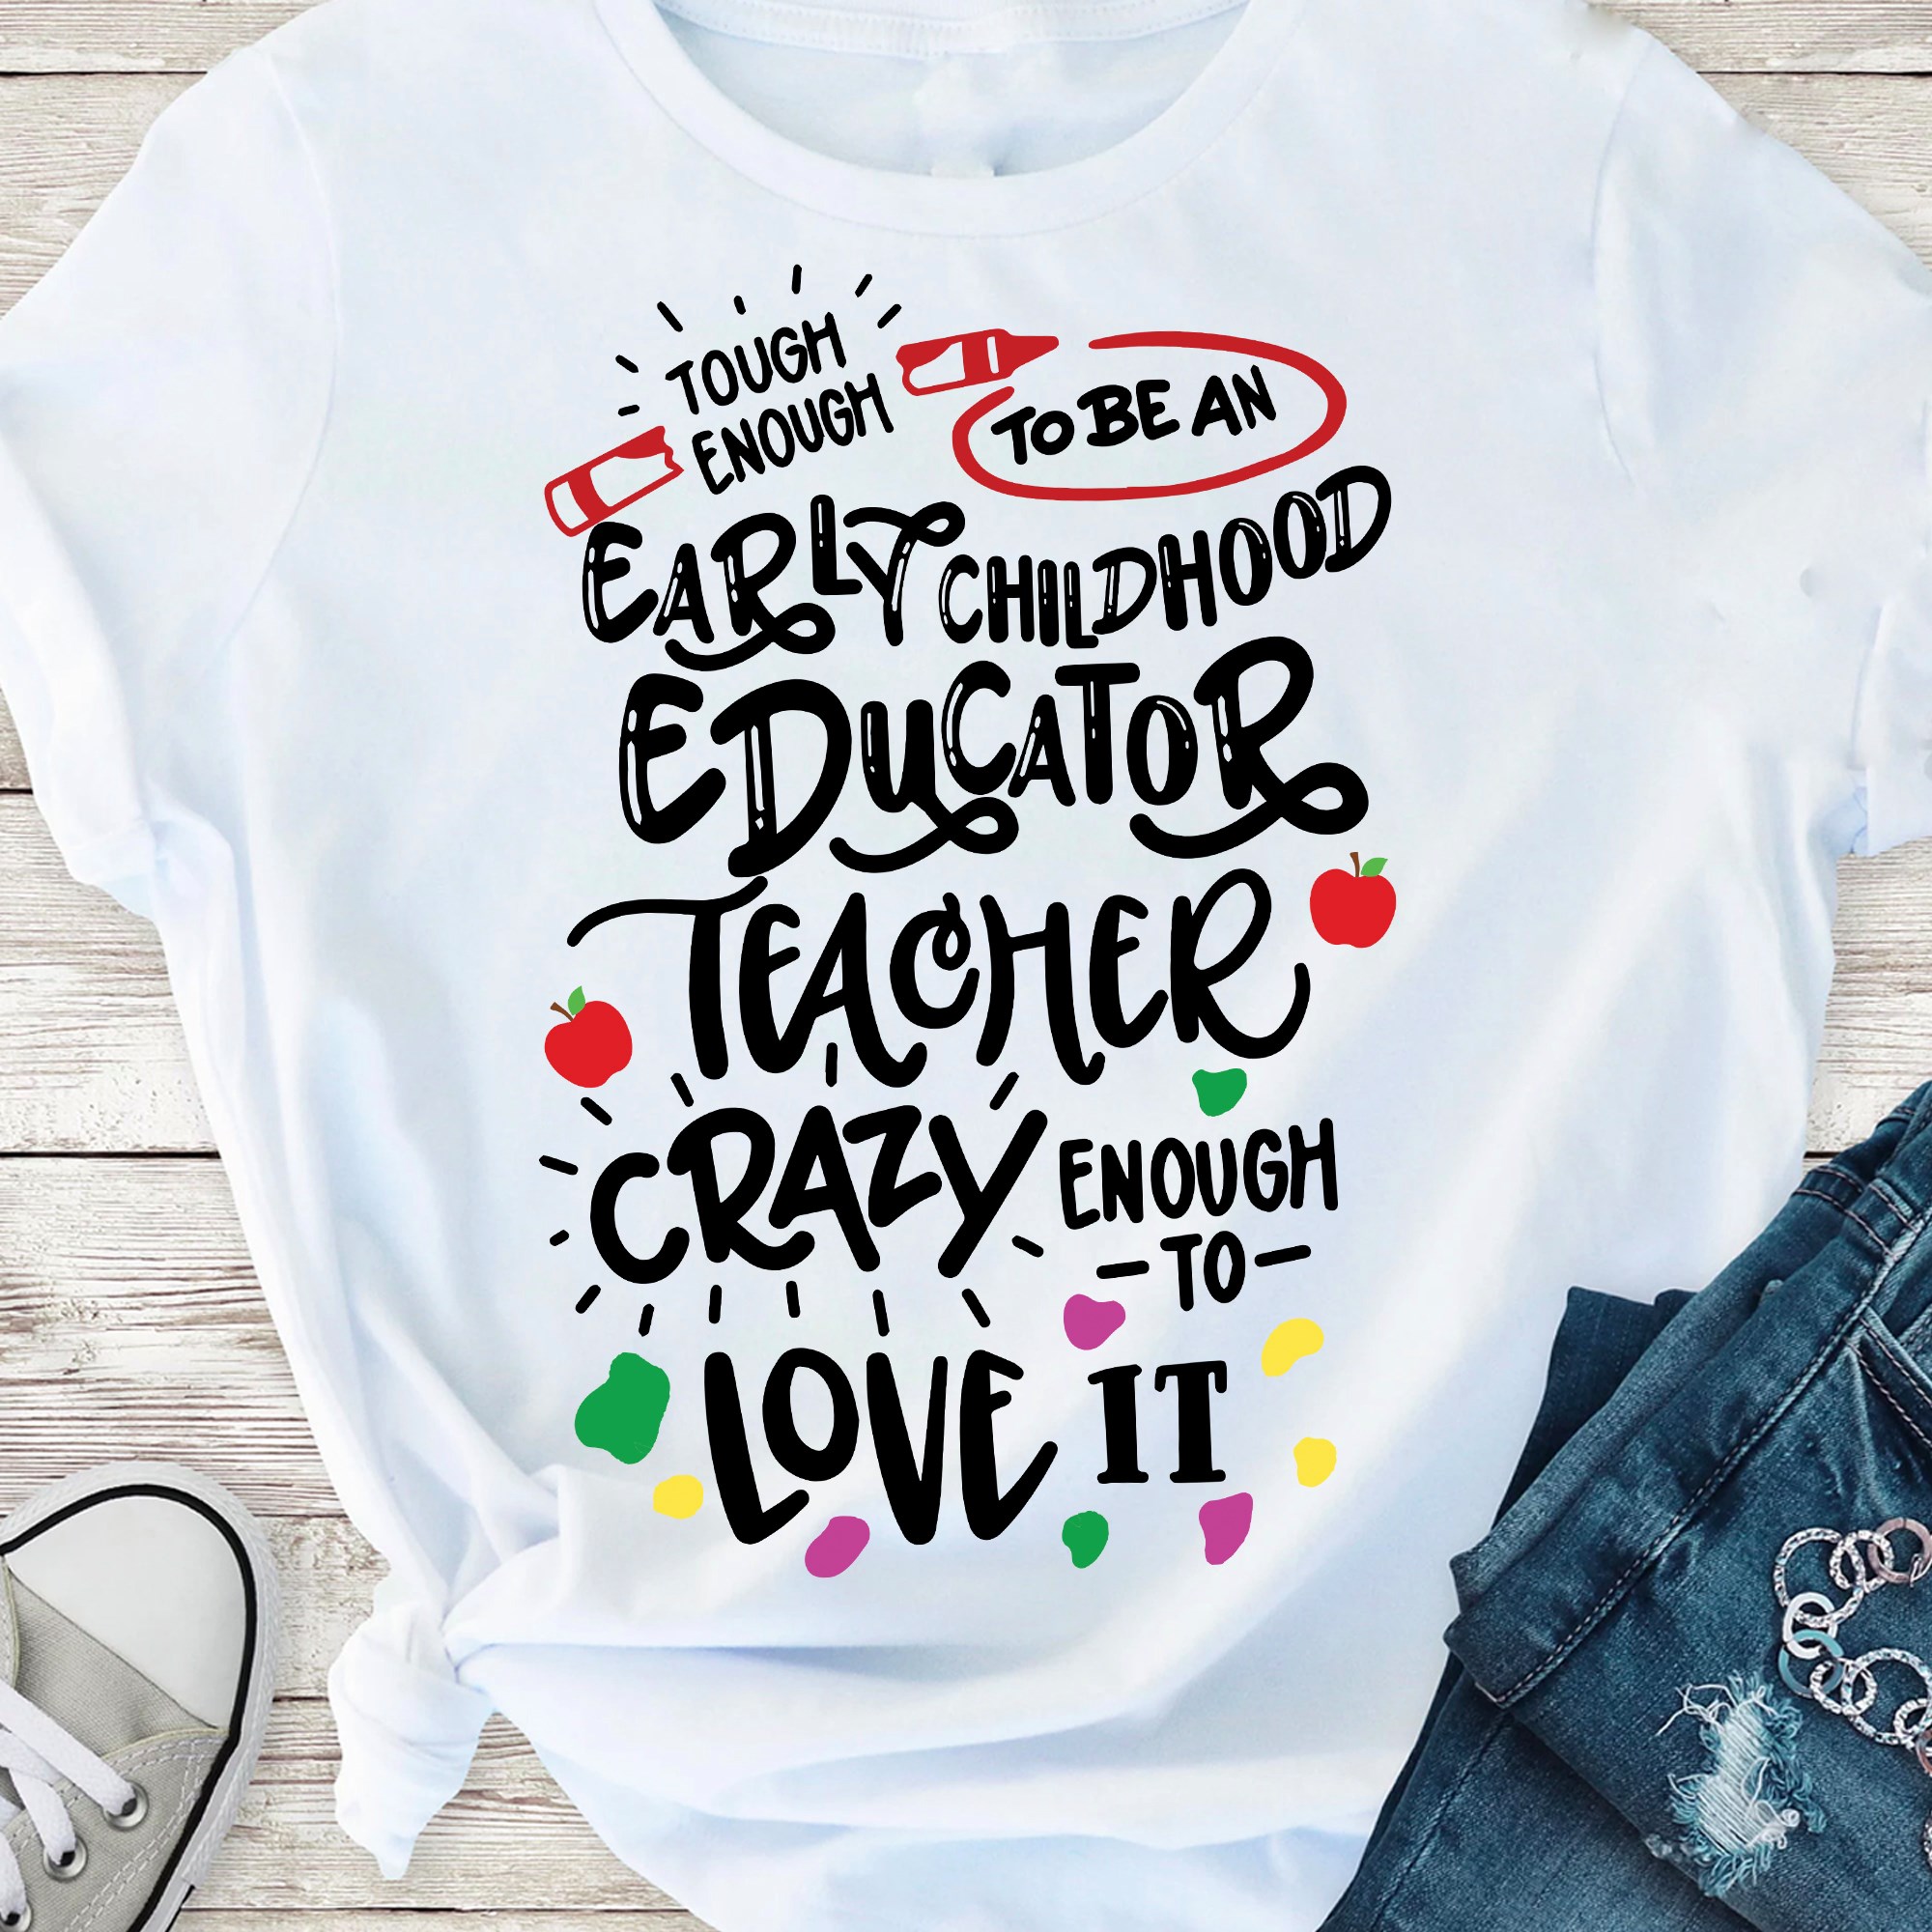 Tough enough to be an early childhood educator teacher crazy enough to love it